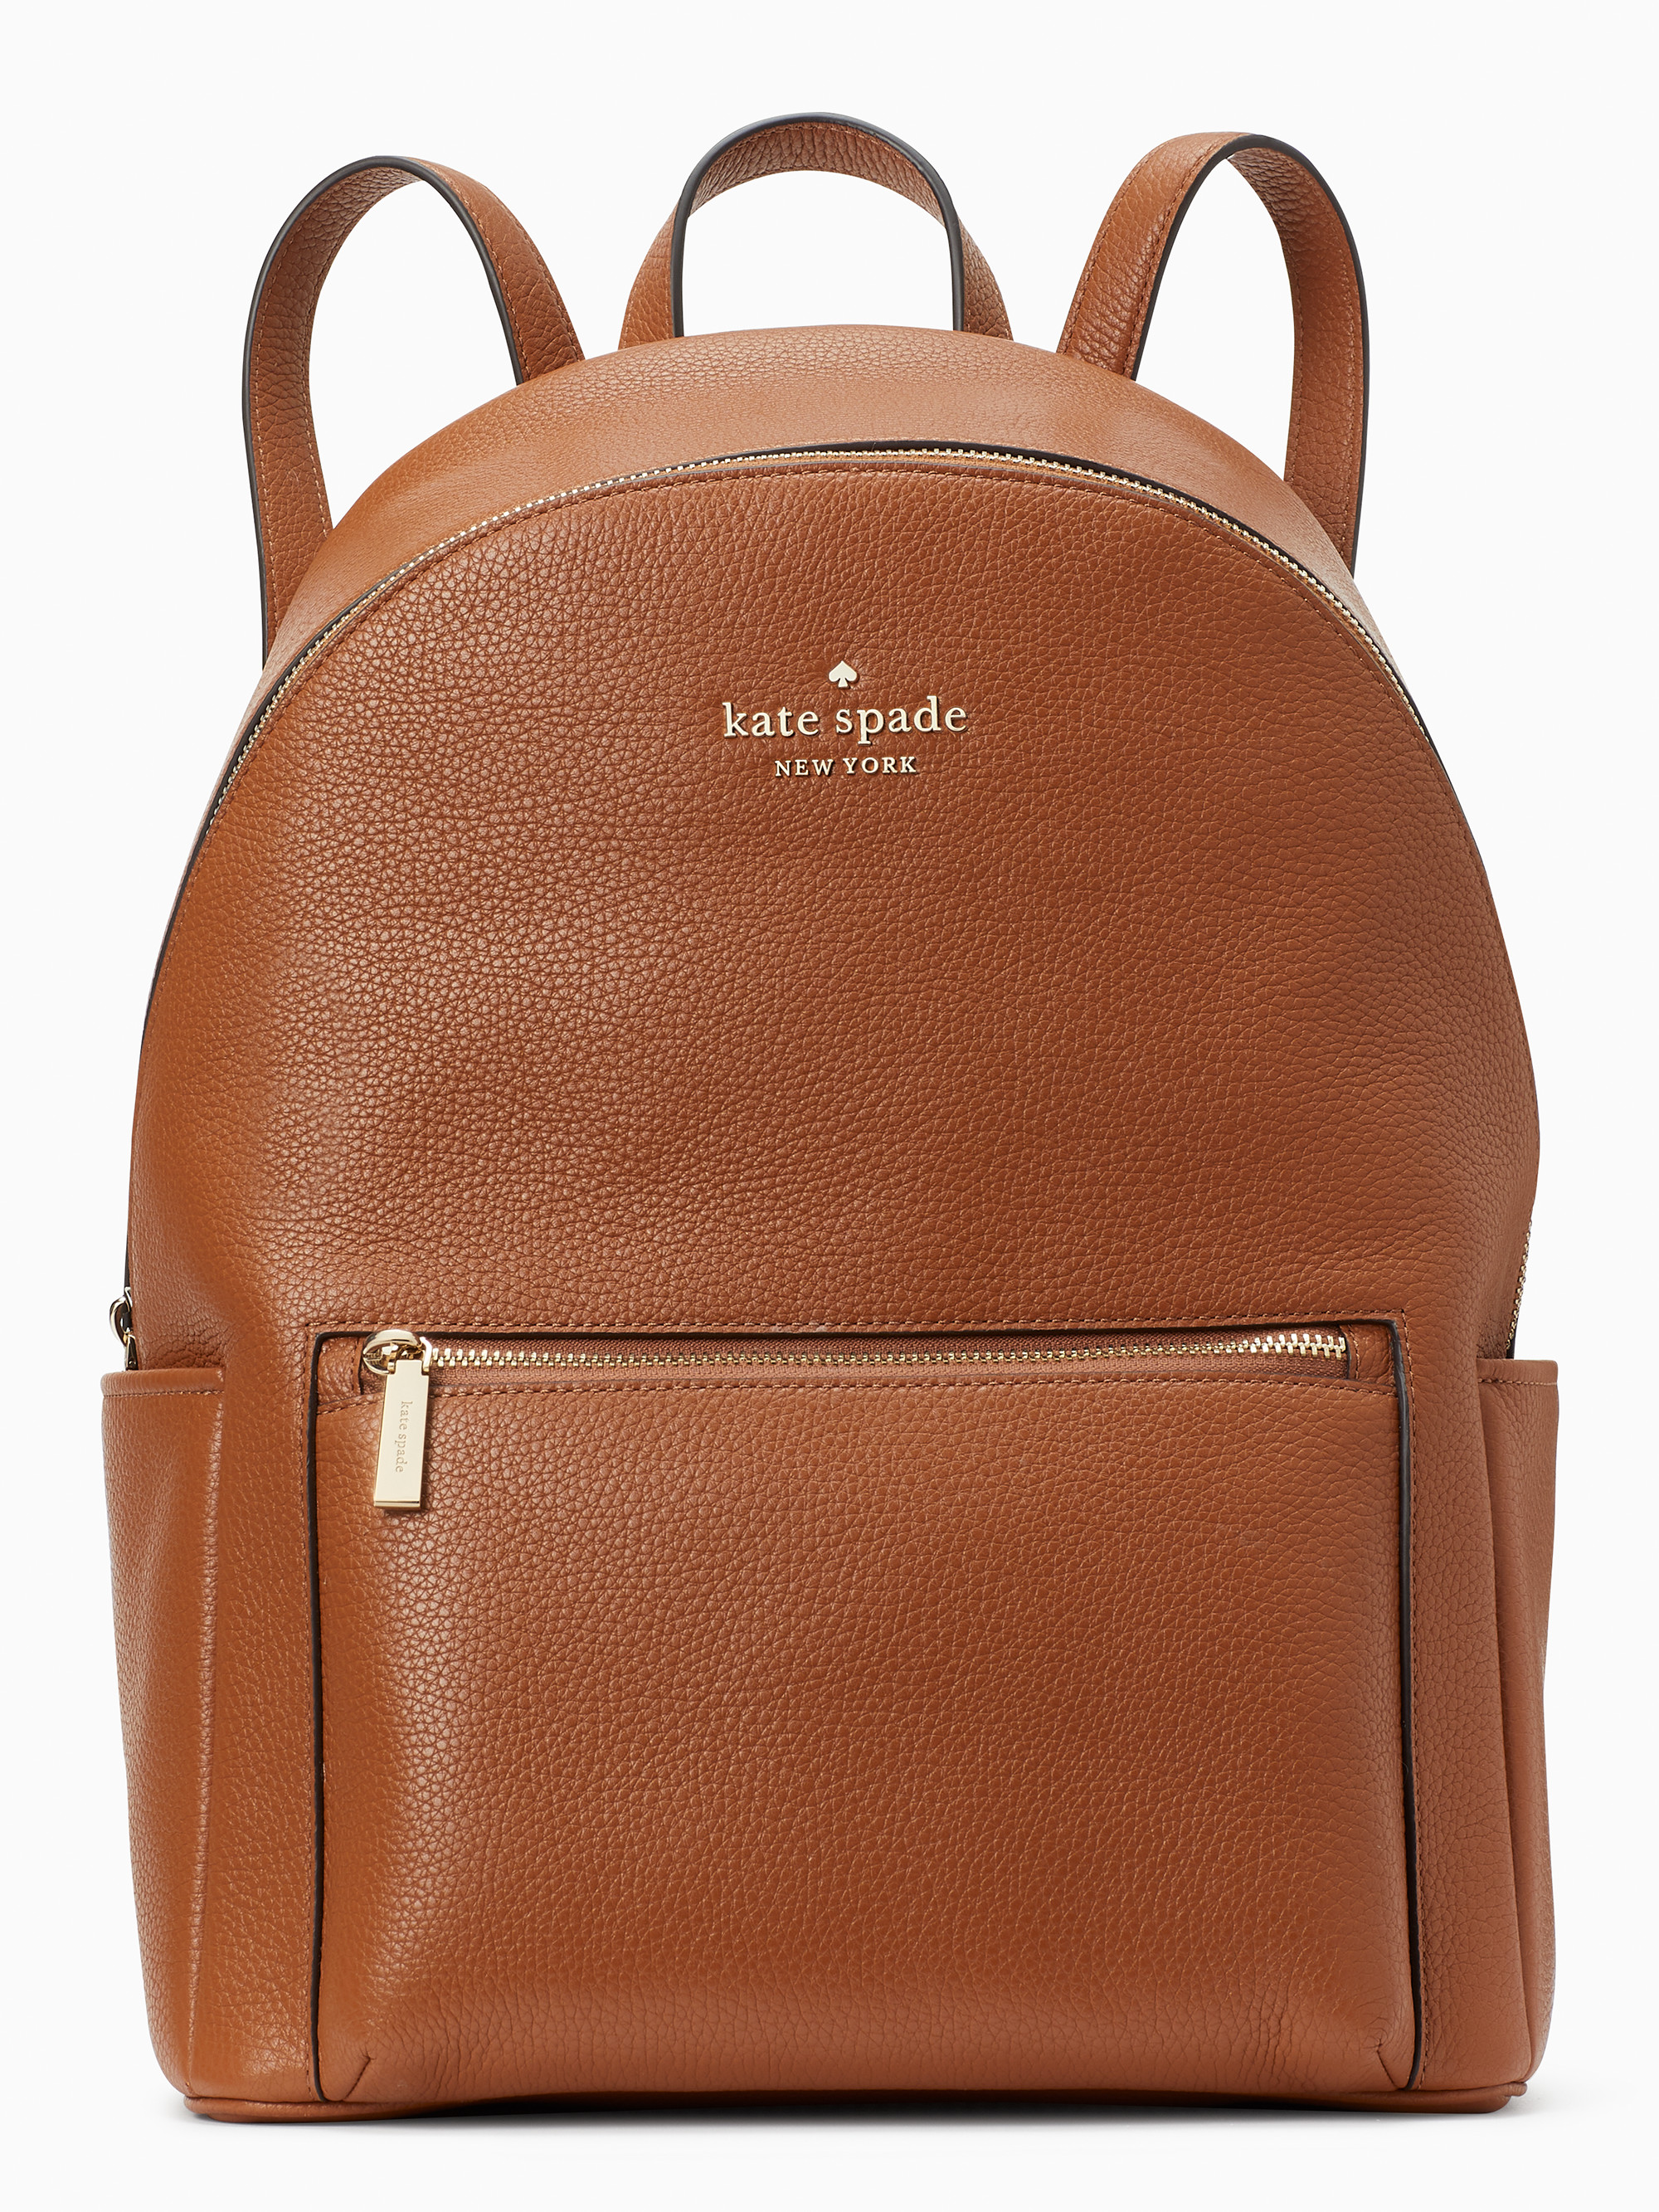 Kate Spade Leila Pebbled Leather Large Dome Backpack